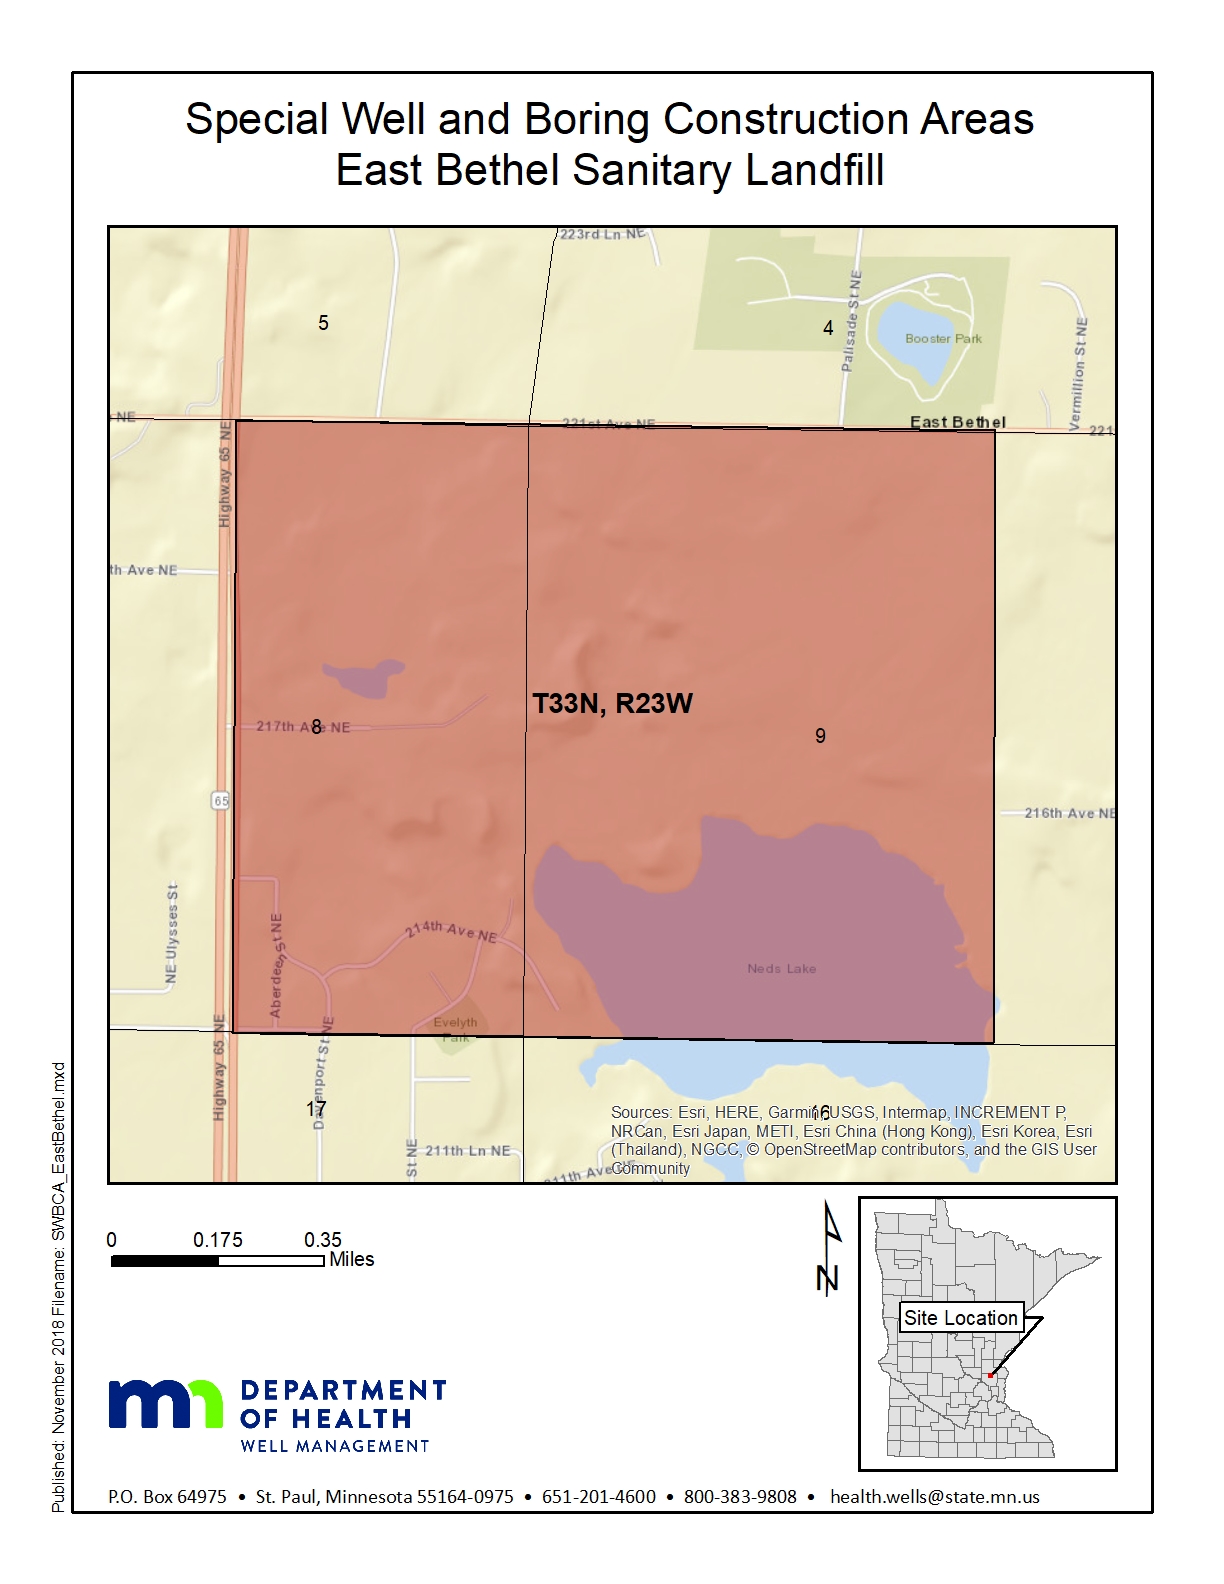 Map showing the special well and boring construction area for the East Bethel Sanitary Landfill area. See boundaries listed above.